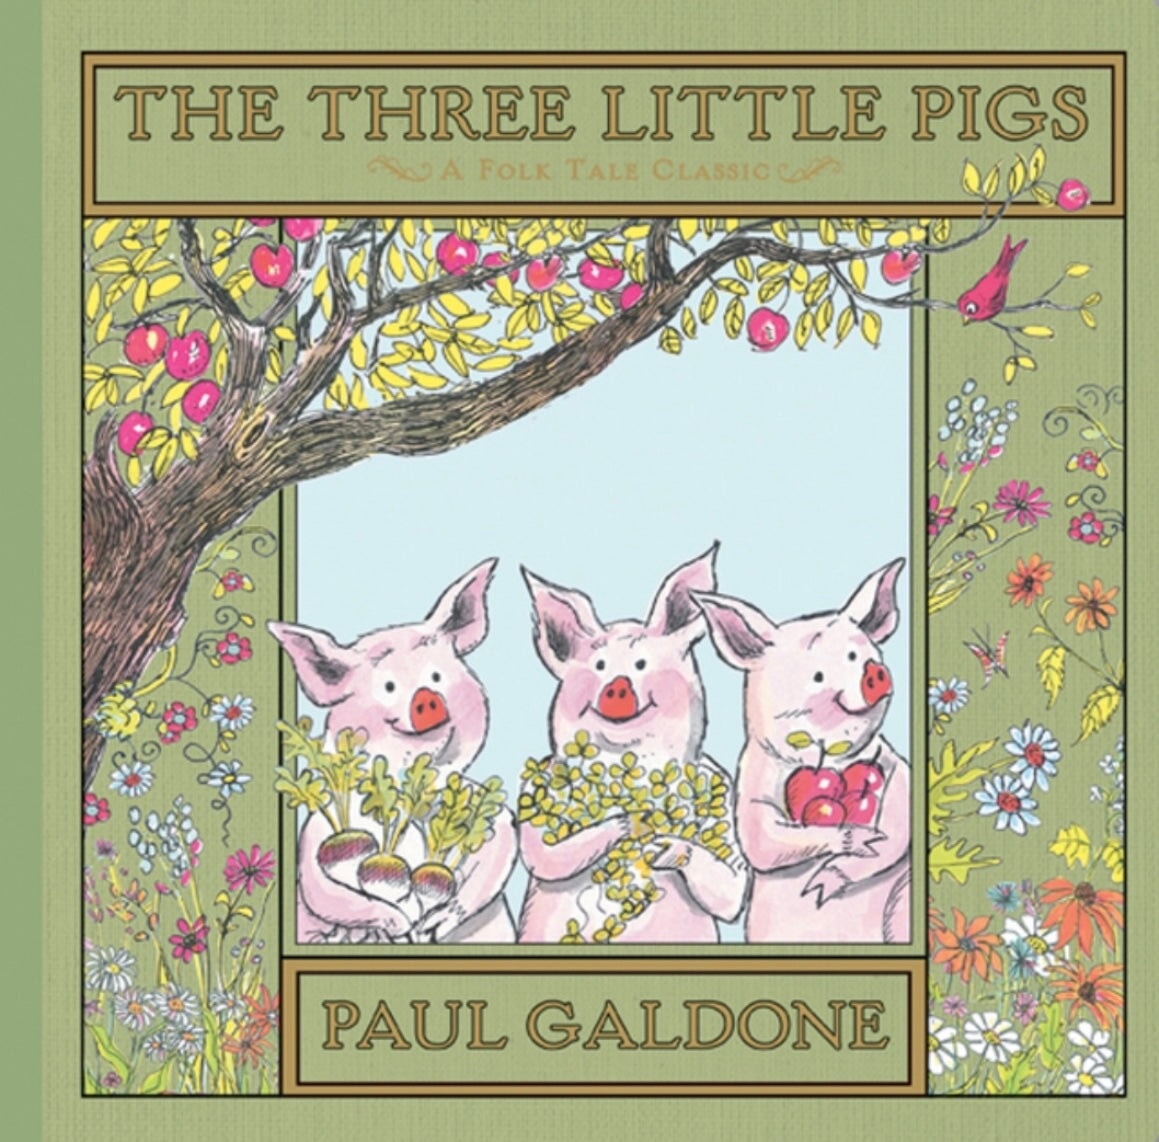 The Three Little Pigs Book by Paul Galdone - Alder & Alouette